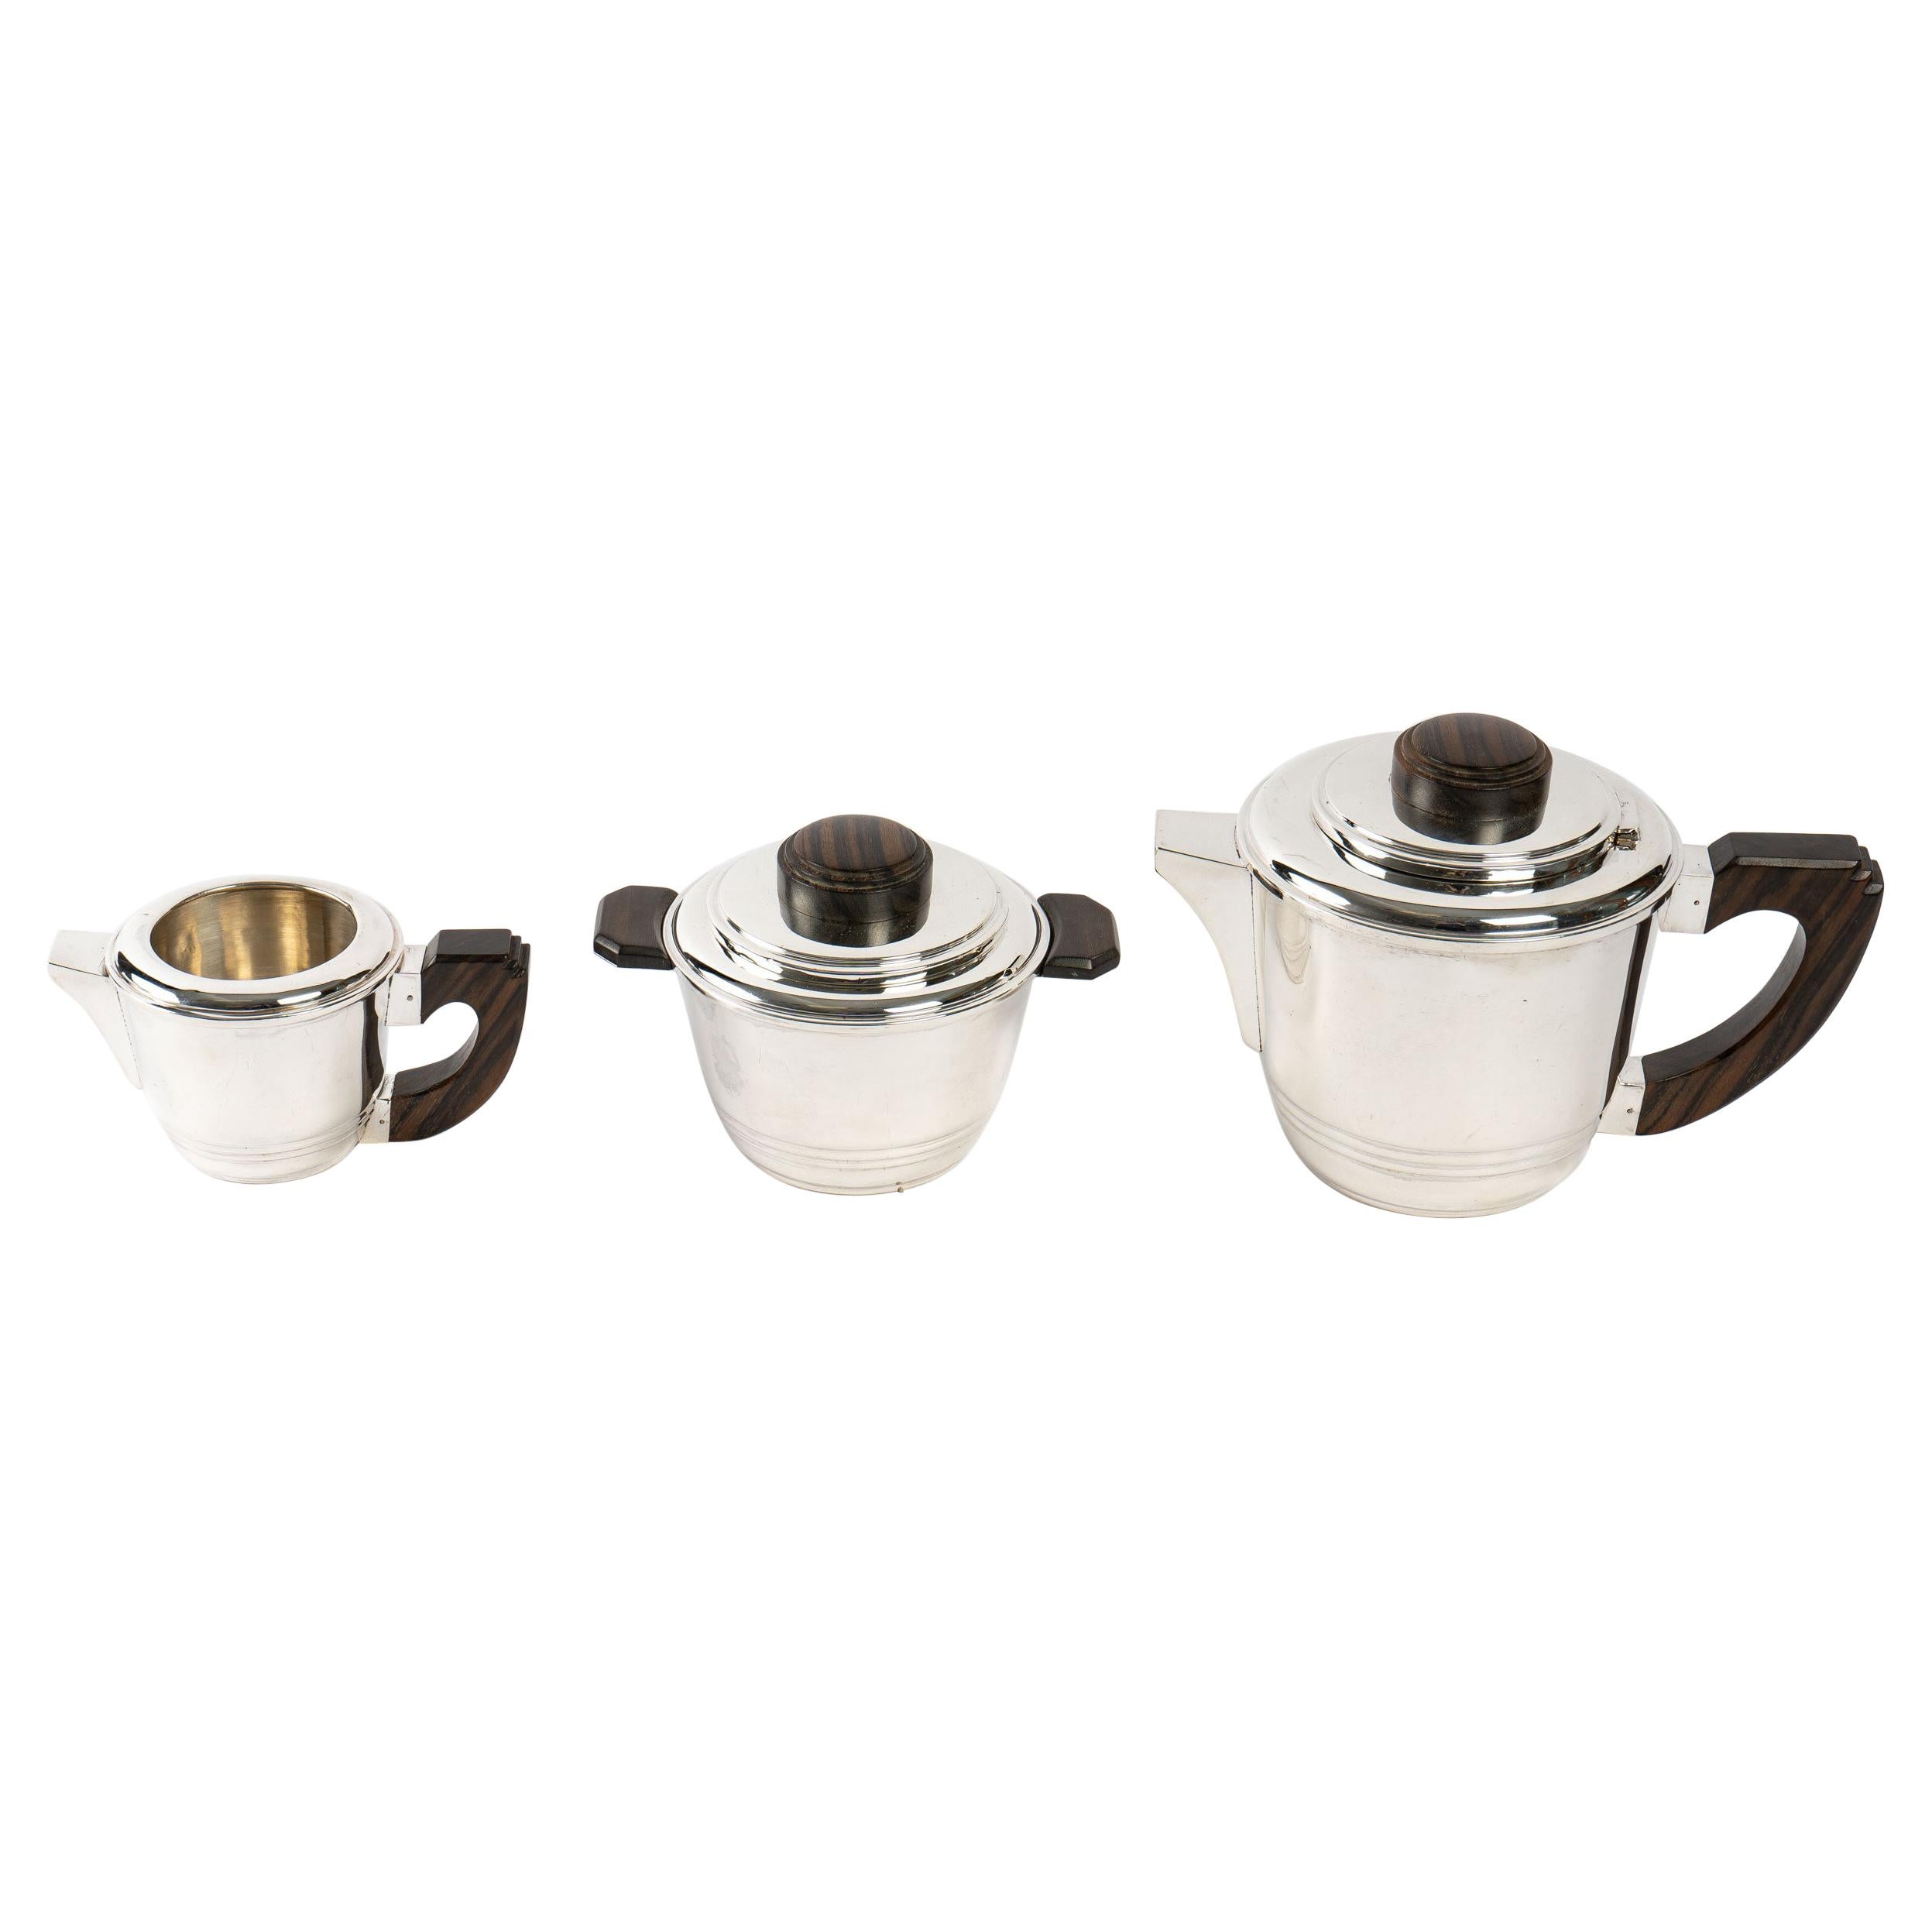 1930 Art Deco, Tea and Coffee Set in Sterling Silver and Macassar